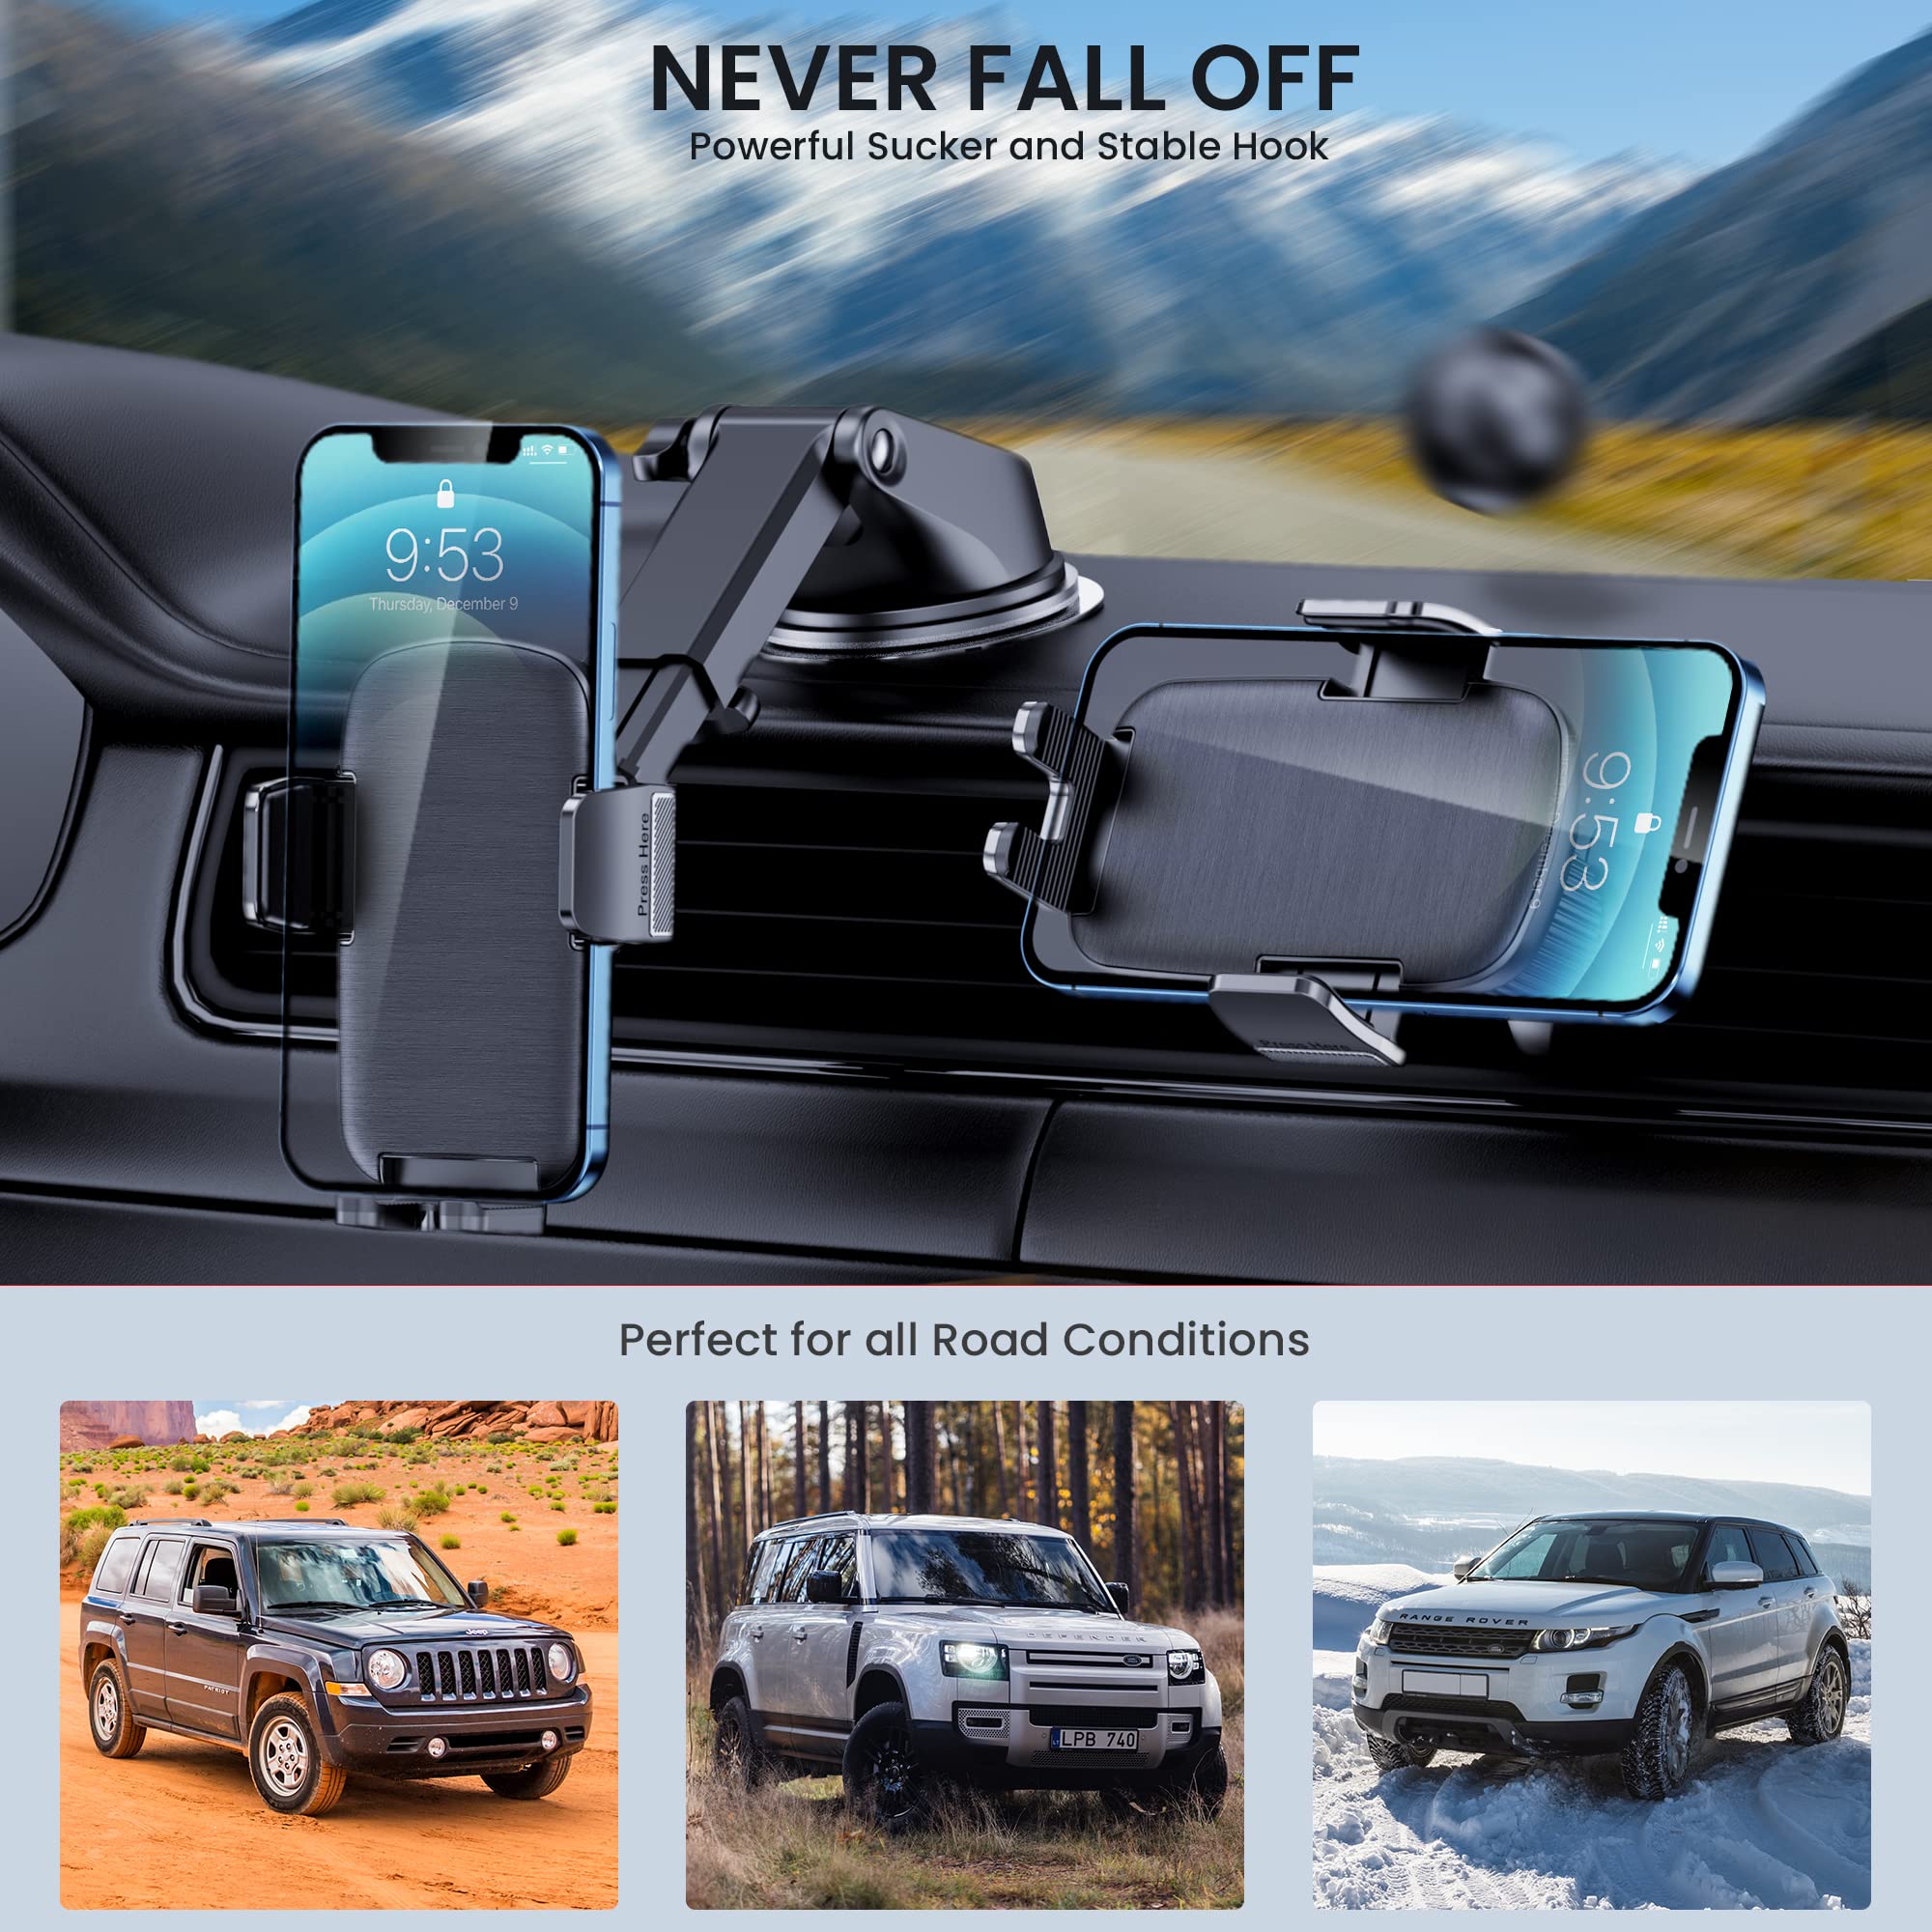 Phone Mount for Car Phone Holder [Military-Grade Suction & Stable Clip]Car Phone Holder Mount Windshield Dashboard Air Vent Universal Cell Phone Automobile Mount Fit For All iPhone Android Smartphones